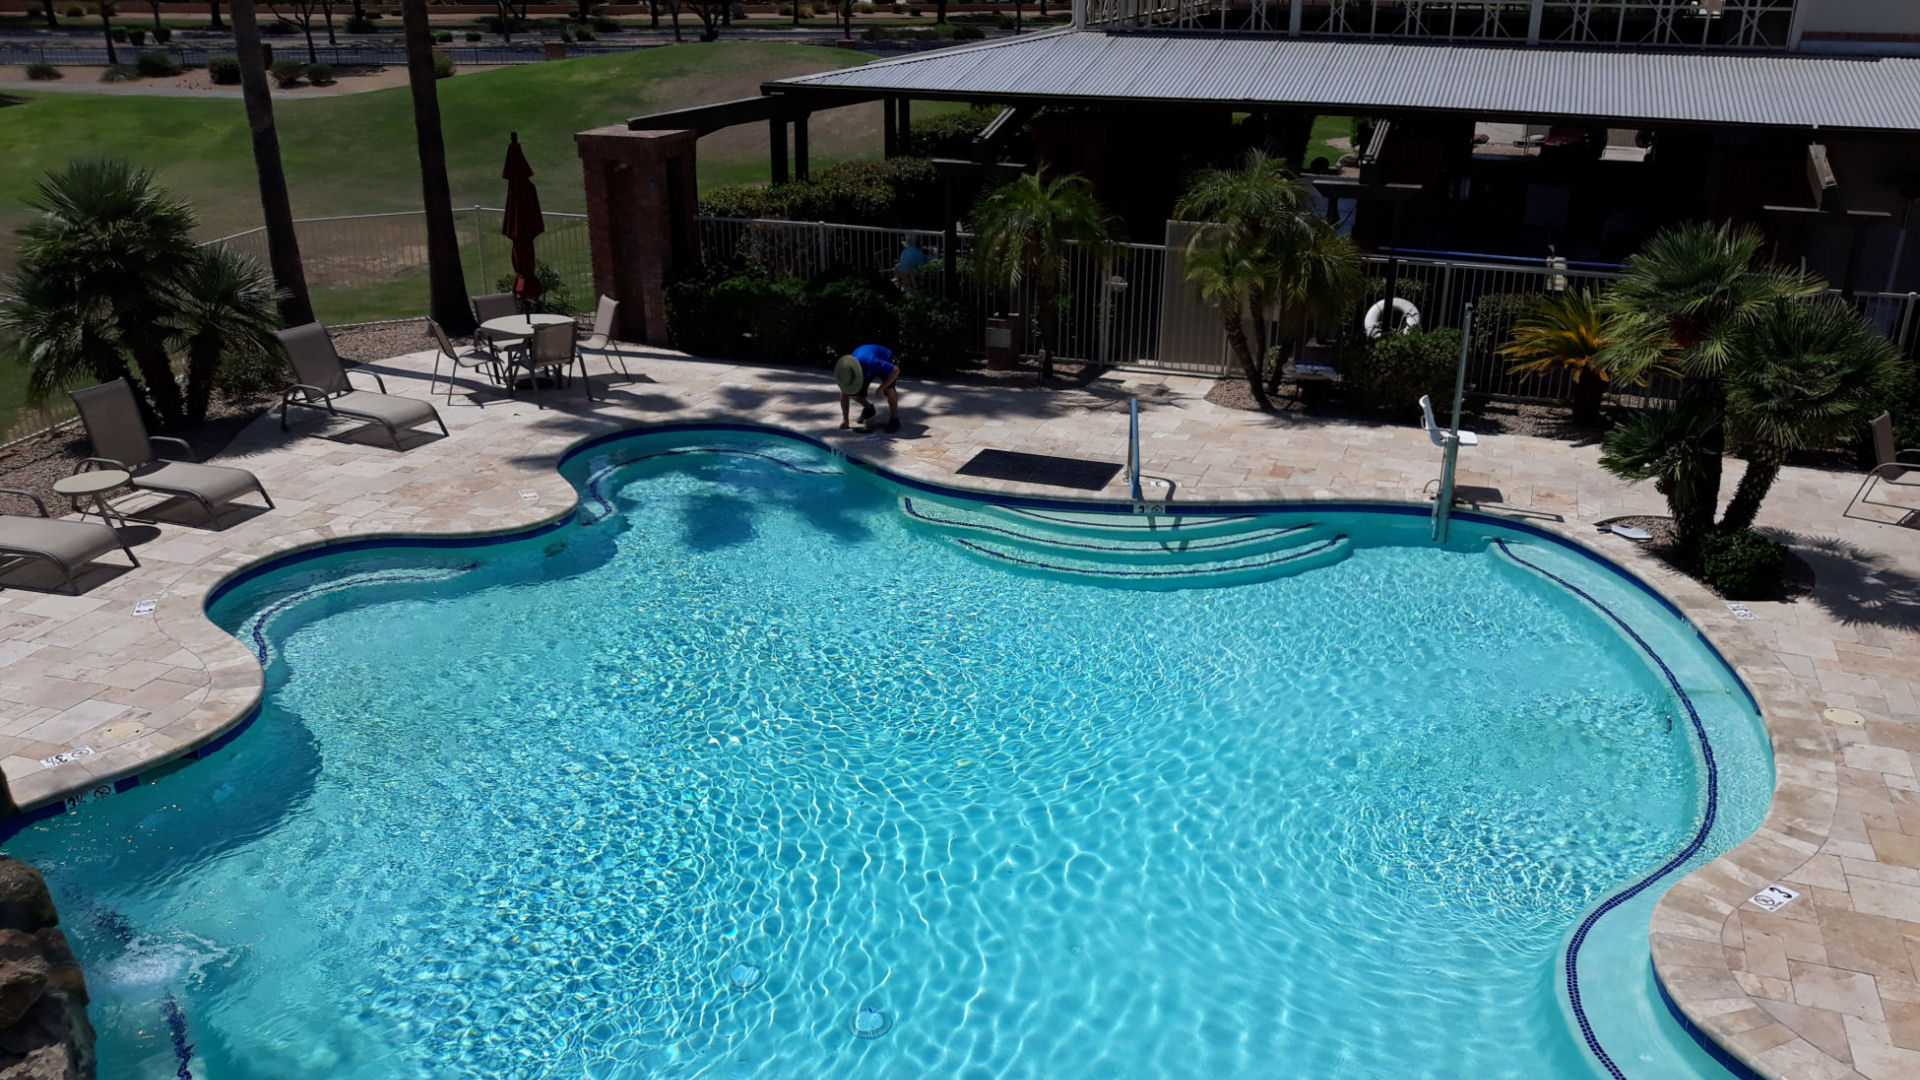 Photo of a swimming pool in a residential community in Surprise AZ